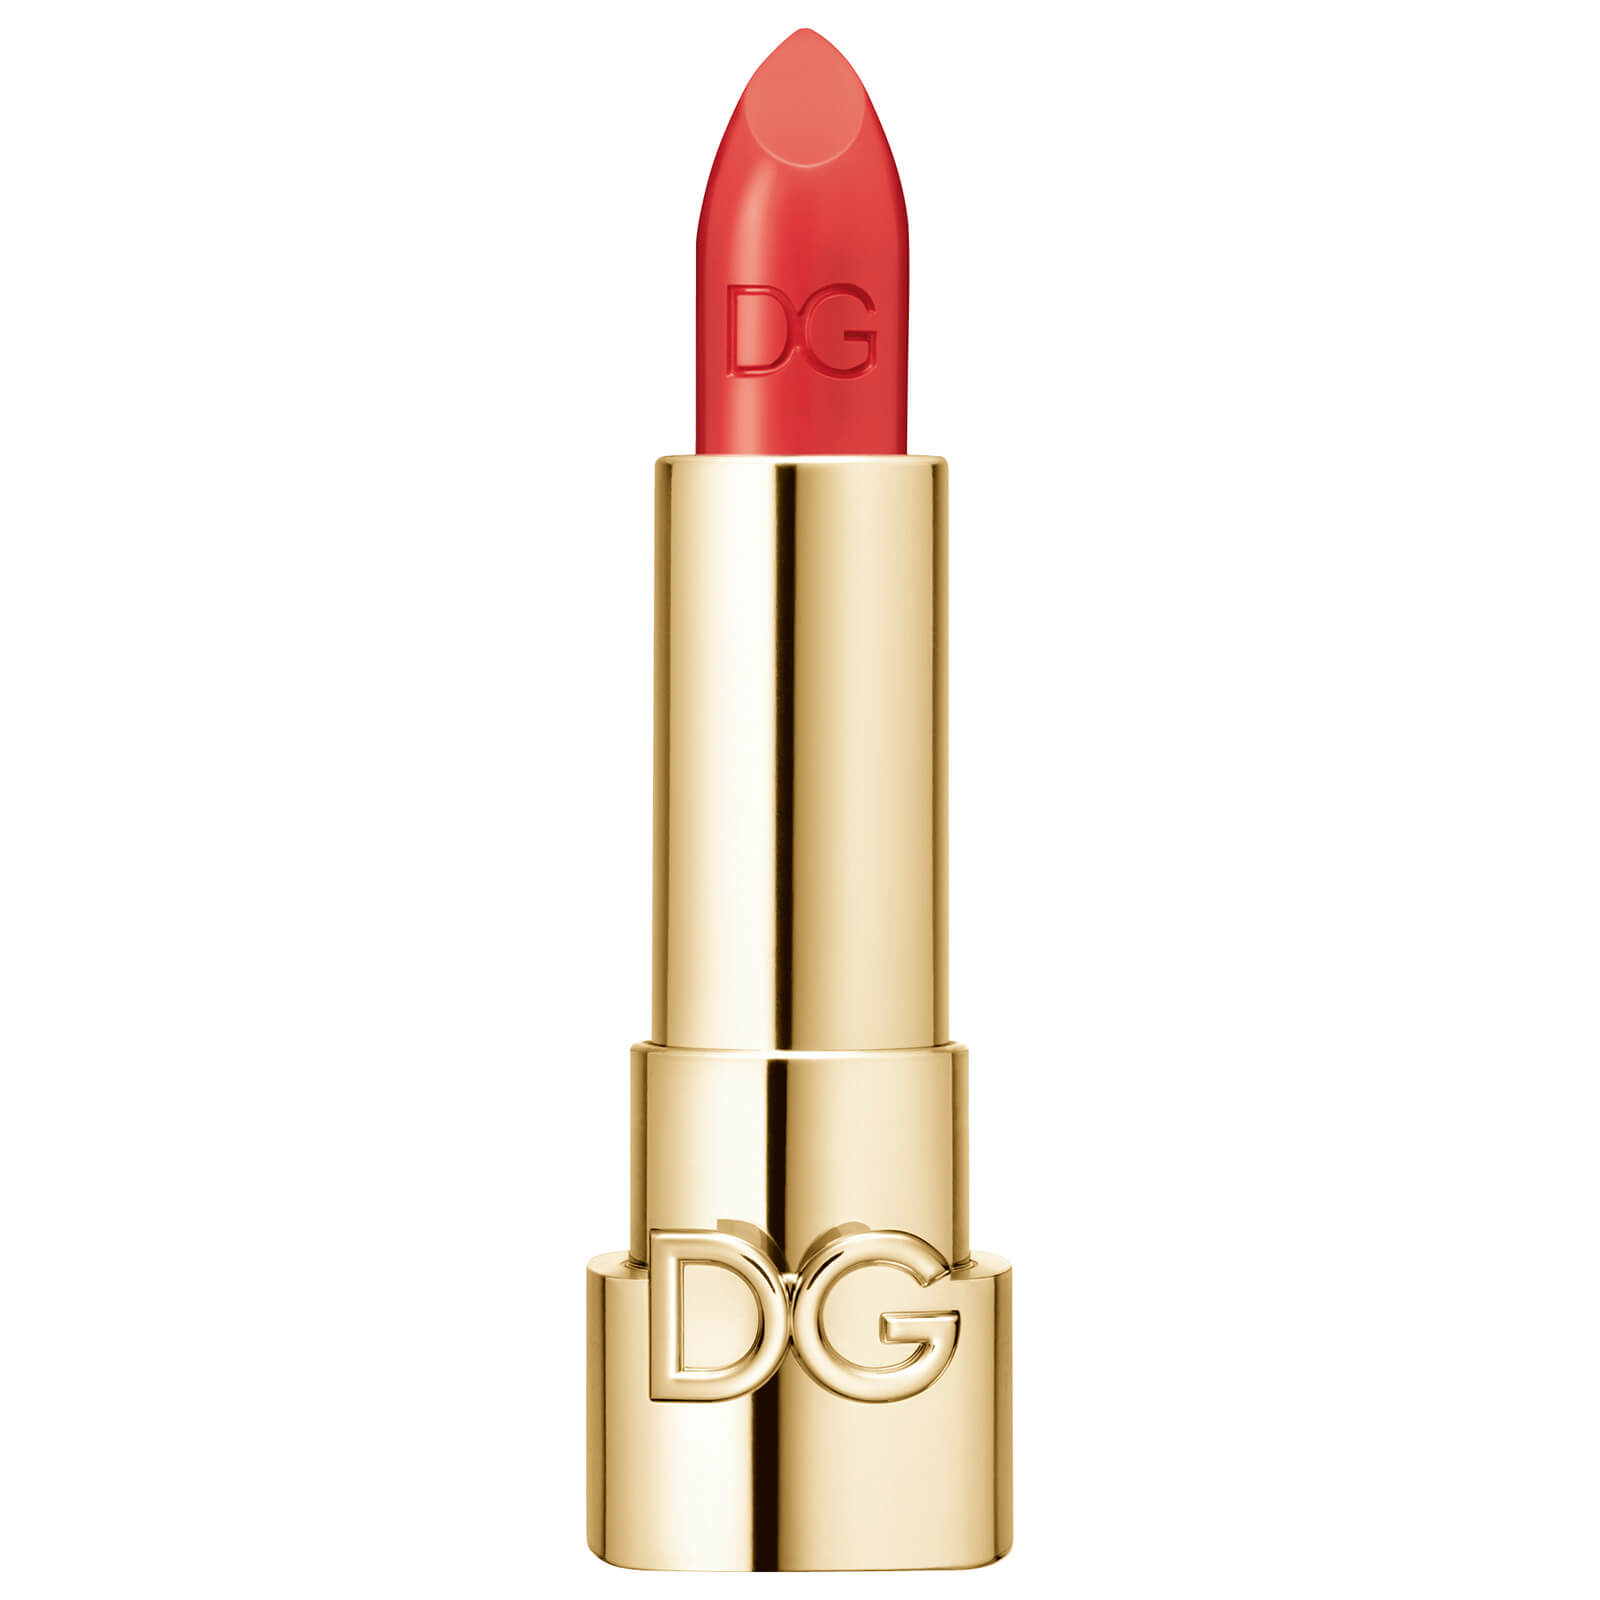 dolce&gabbana the only one lipstick 1.7g (no cap) (various shades) - 600 real fire